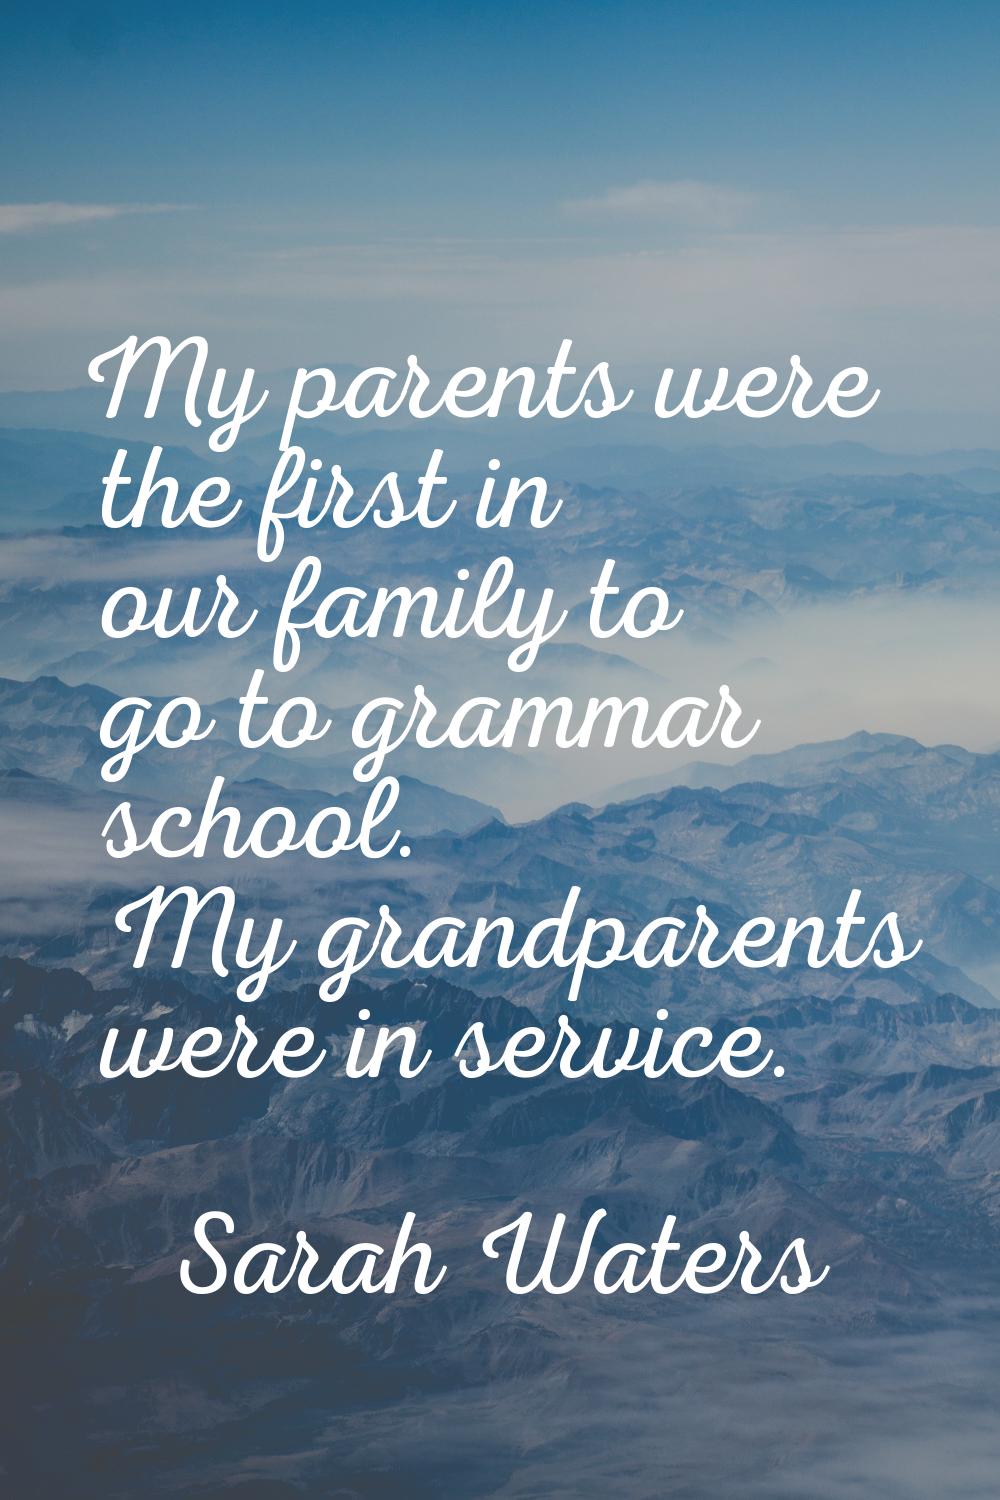 My parents were the first in our family to go to grammar school. My grandparents were in service.